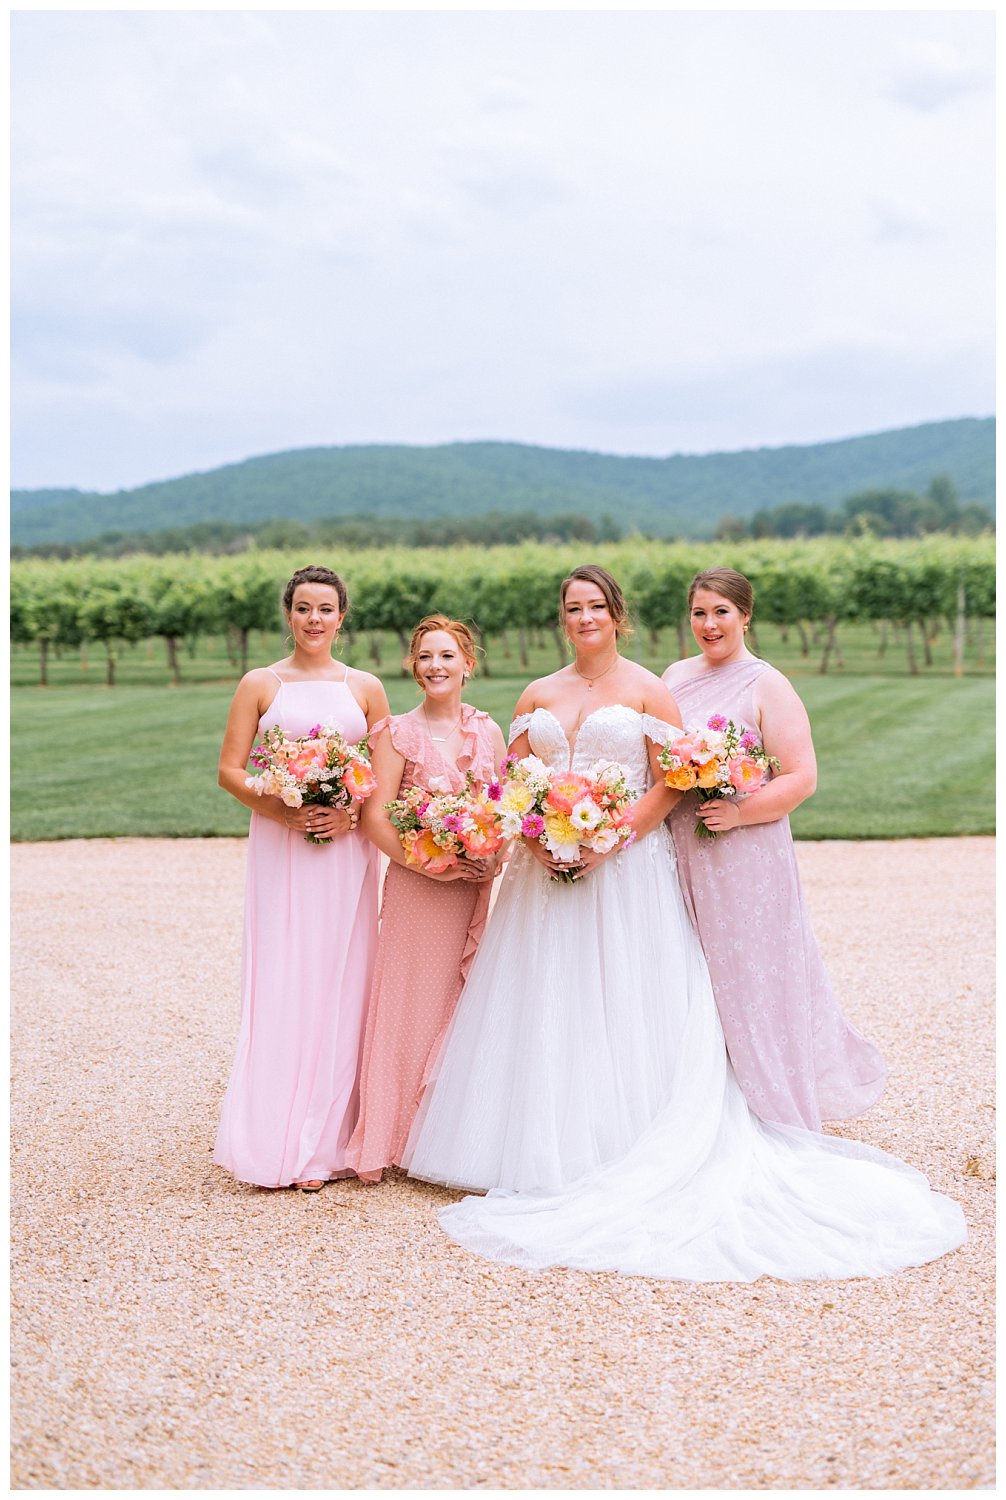 Portraits of bride with bridesmaids at a colorful summer wedding